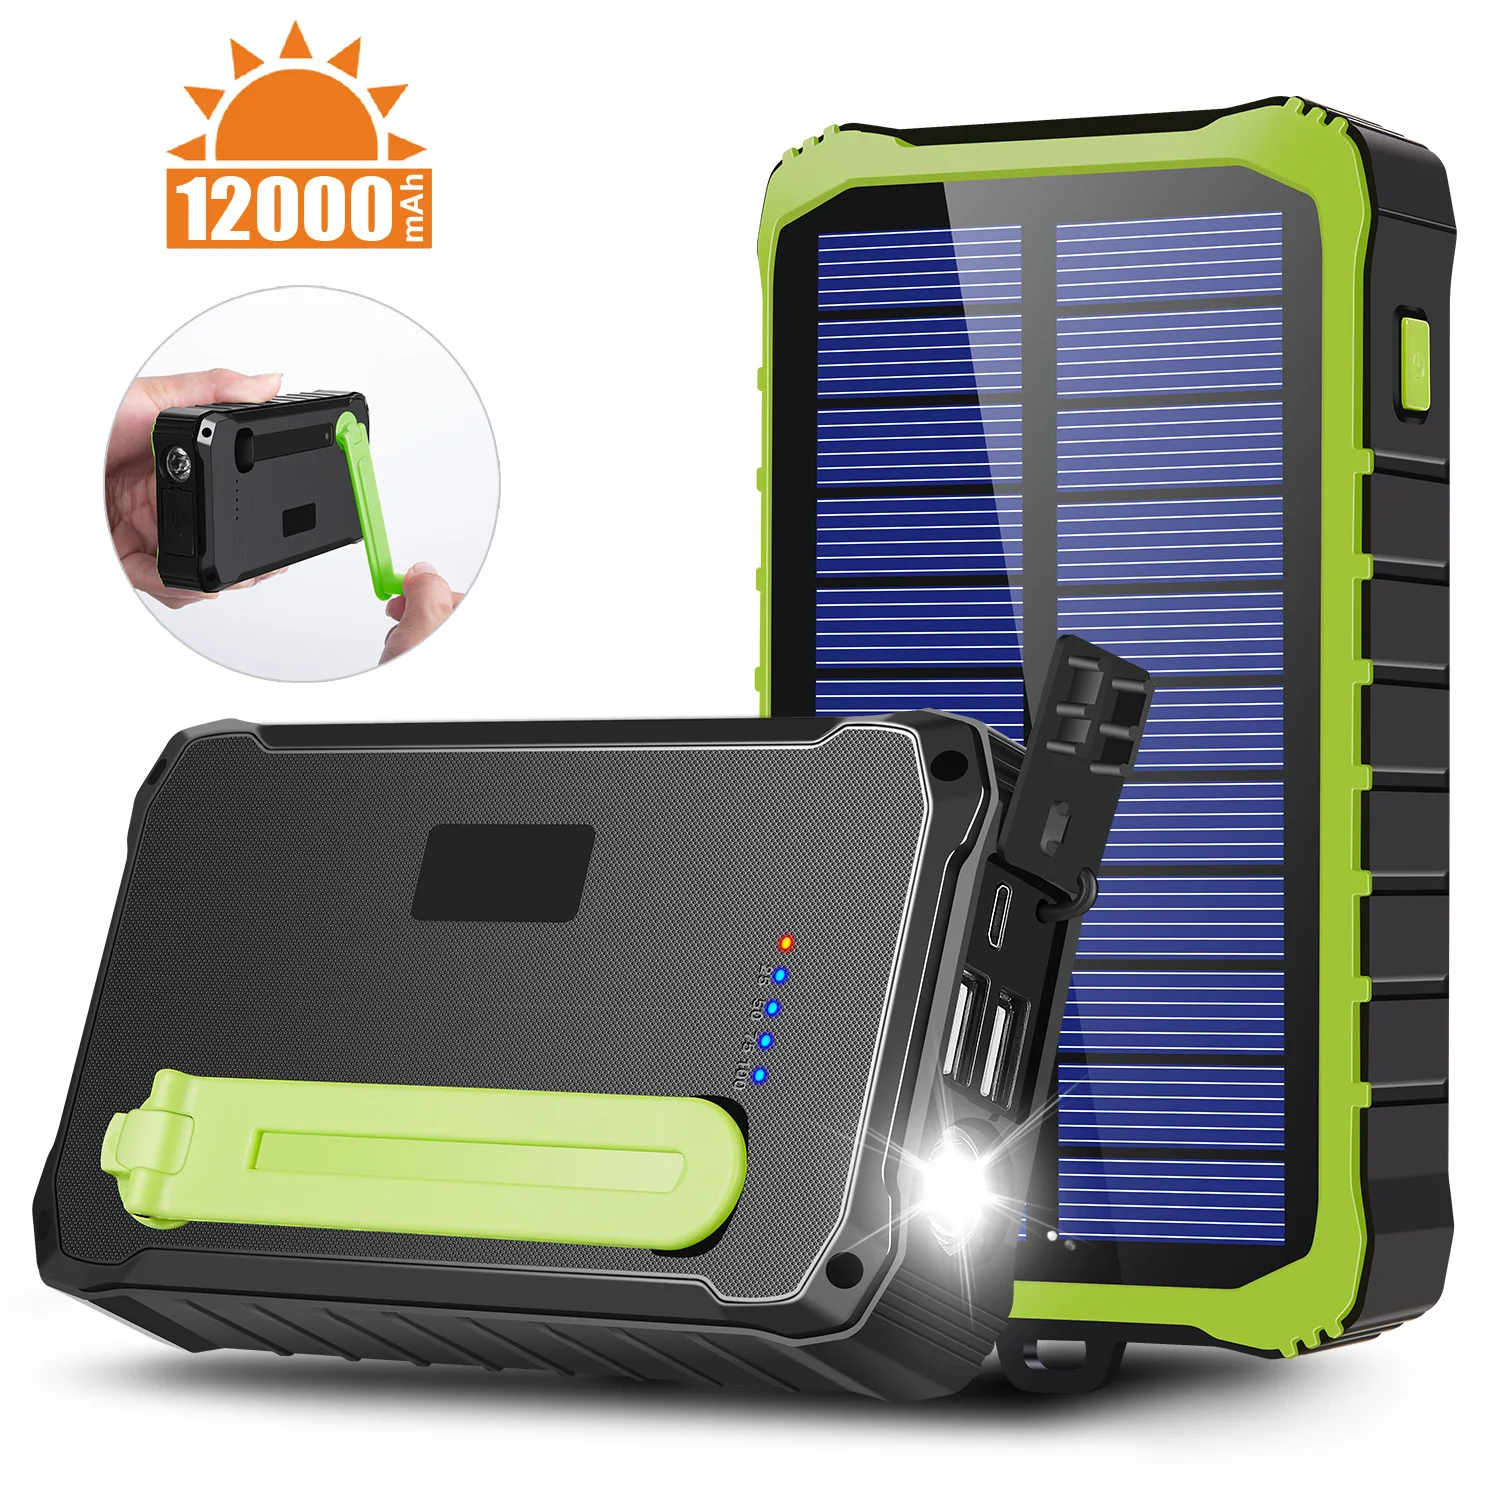 

Trending 2021 Emergency mobile phone portable solar hand crank charger 10000mAh for outdoor